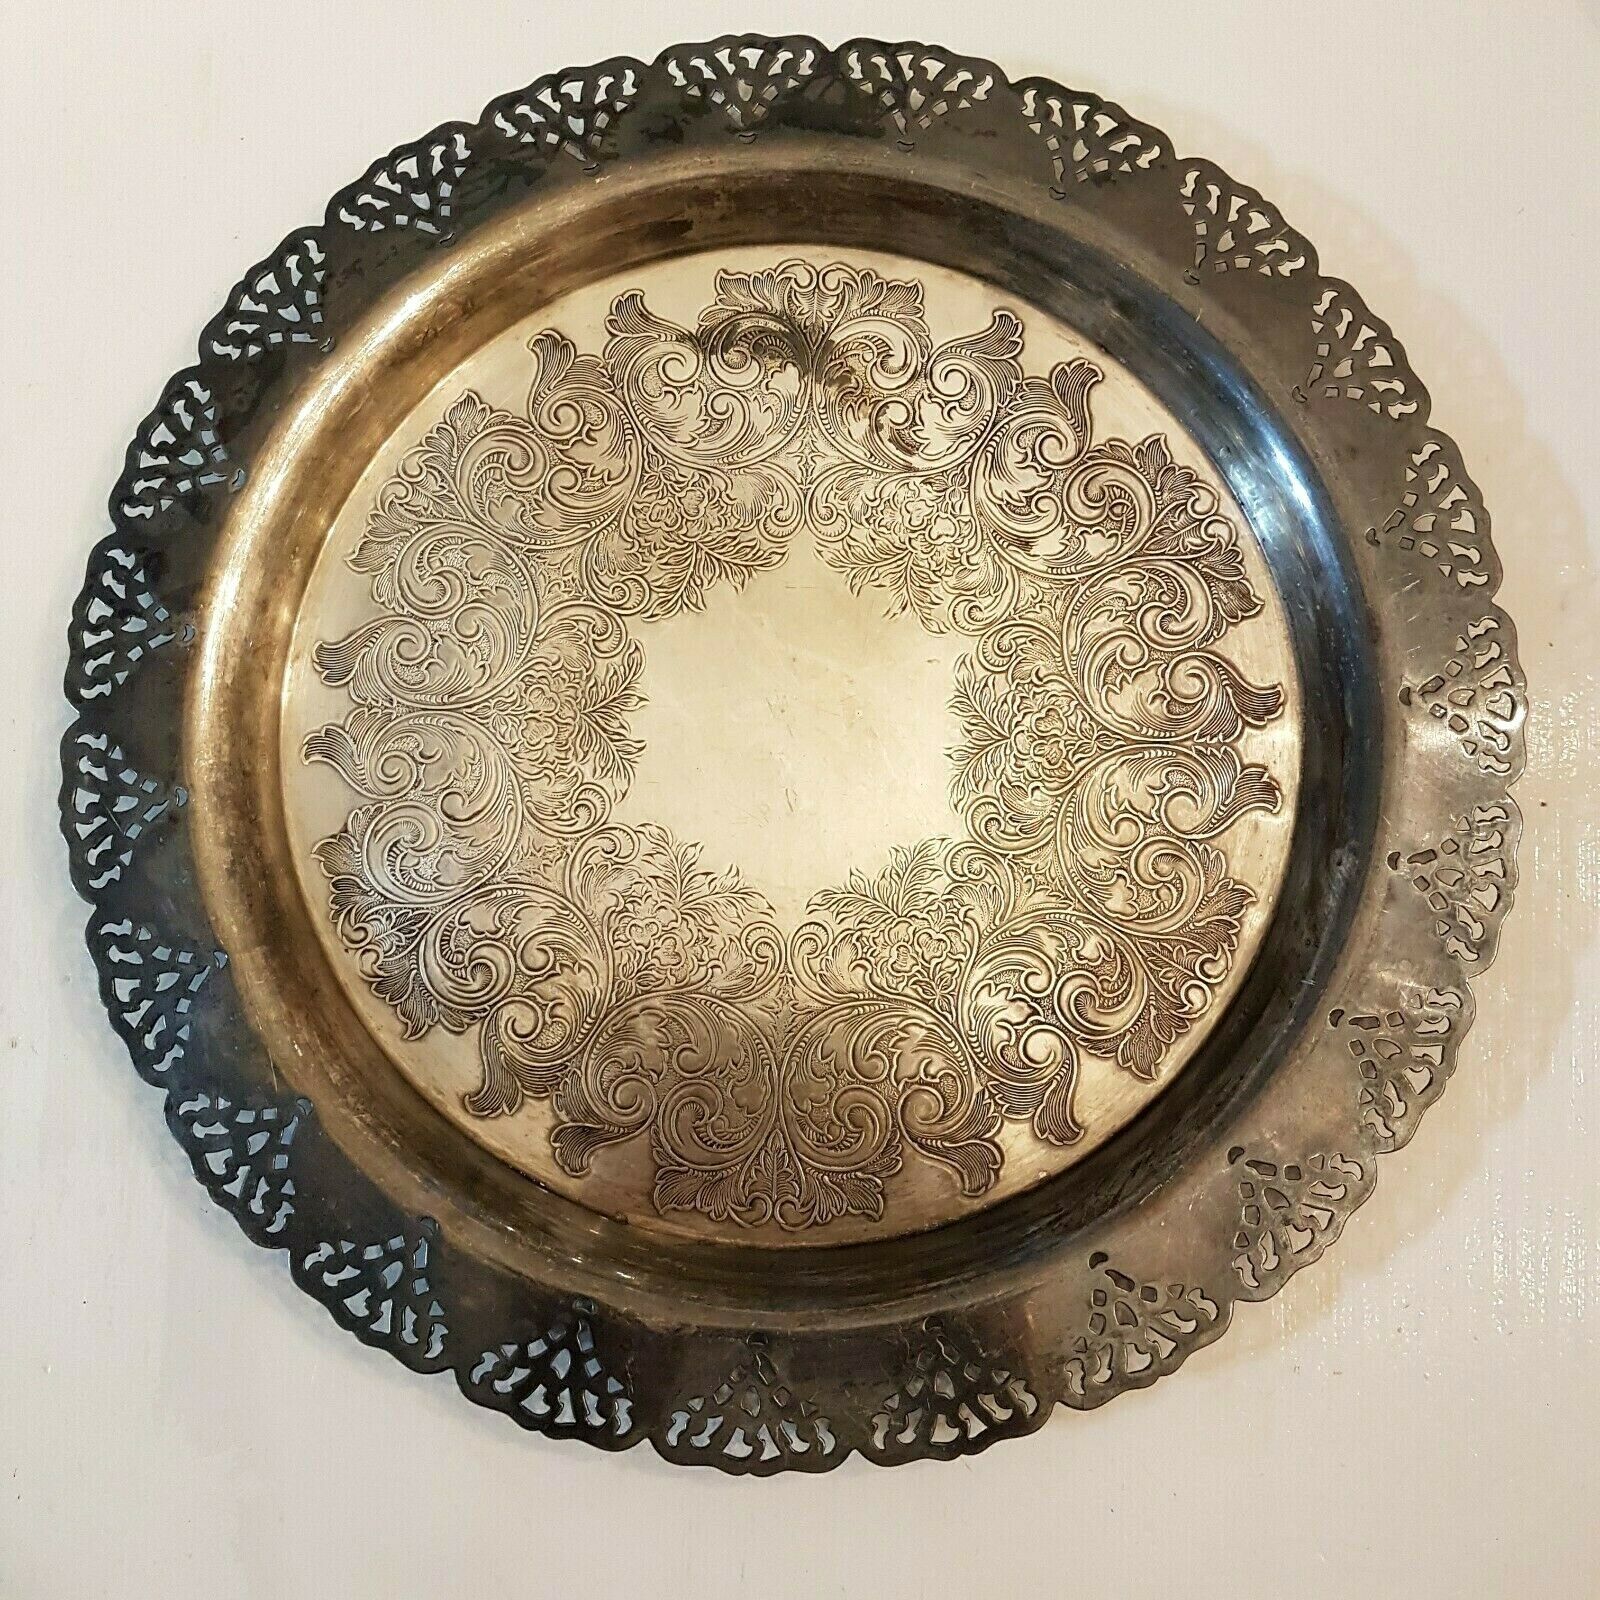 Primary image for SILVERPLATED SERVING TRAY 12.75" HOME DECORATORS Ornate Cut Out Scroll Work VTG